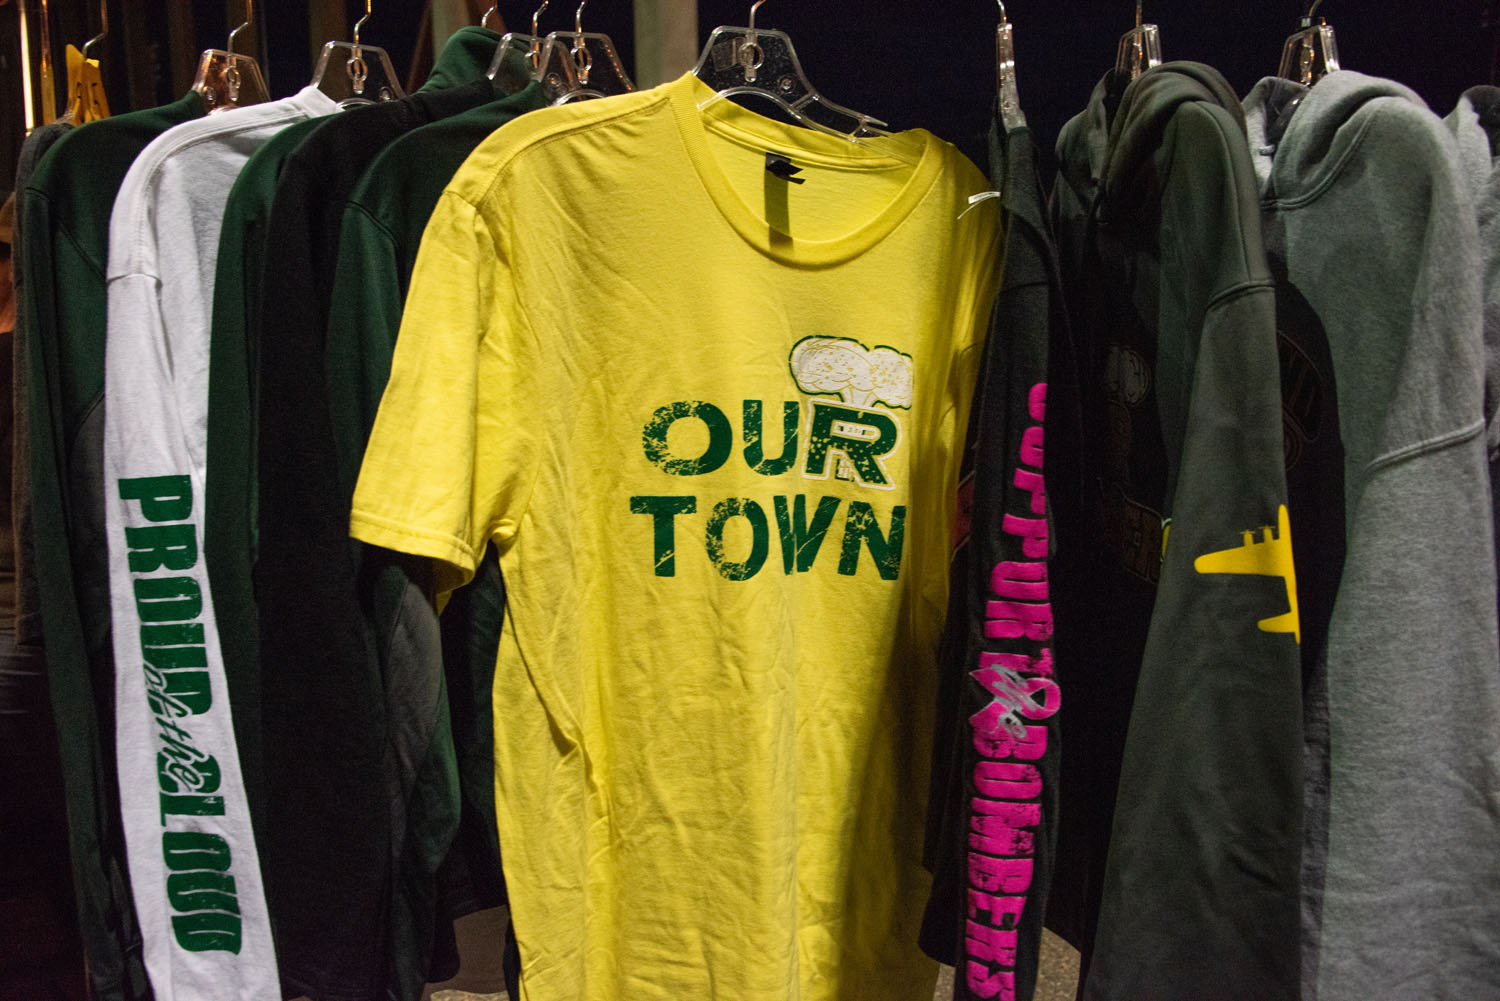 Apparel for sale at a Richland high-school football game. Photography by Sean McDermott.